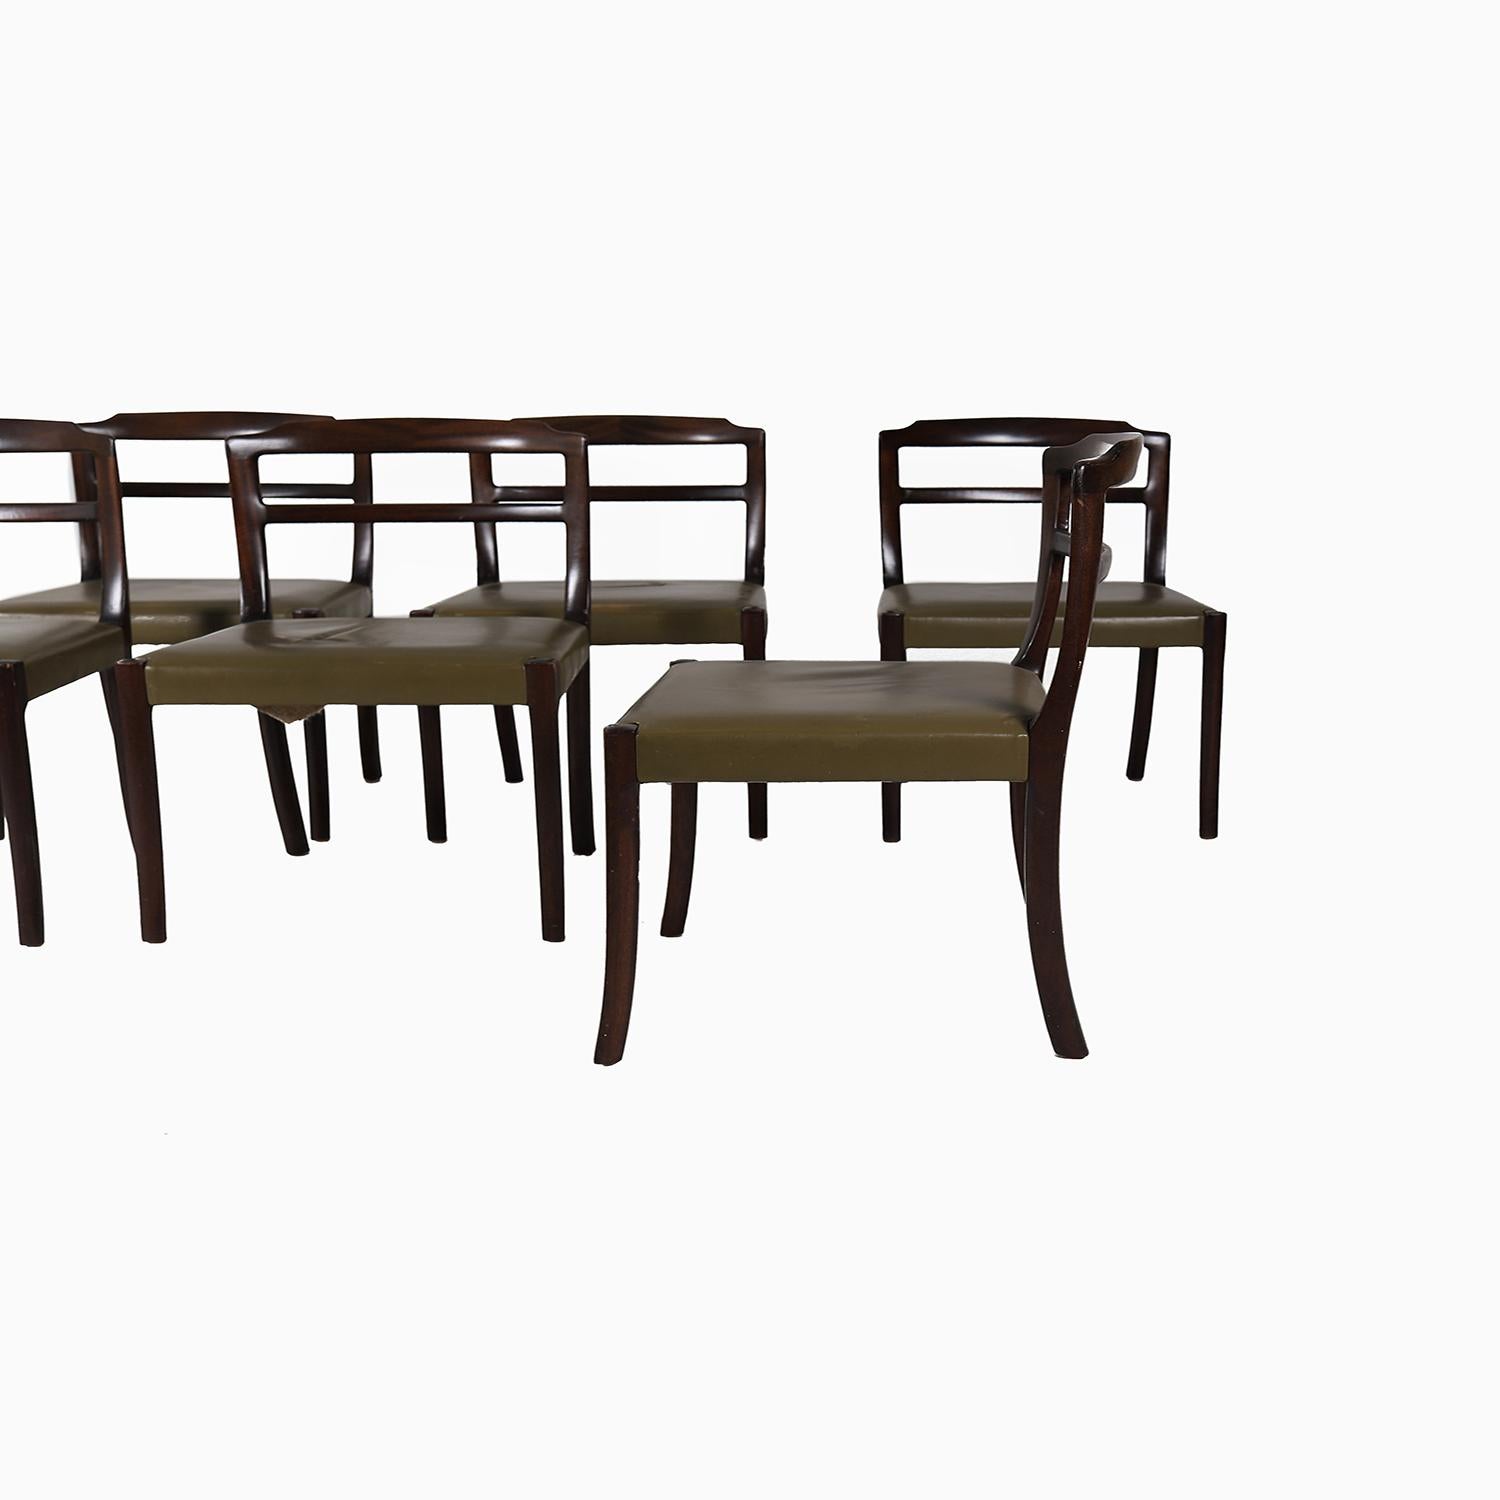 An elegant design by Danish modern designer Ole Wanscher. An elegant design constructed in a rich dark mahogany. beautiful from all angles. Please inquire about upholstery options.

Professional, skilled furniture restoration is an integral part of